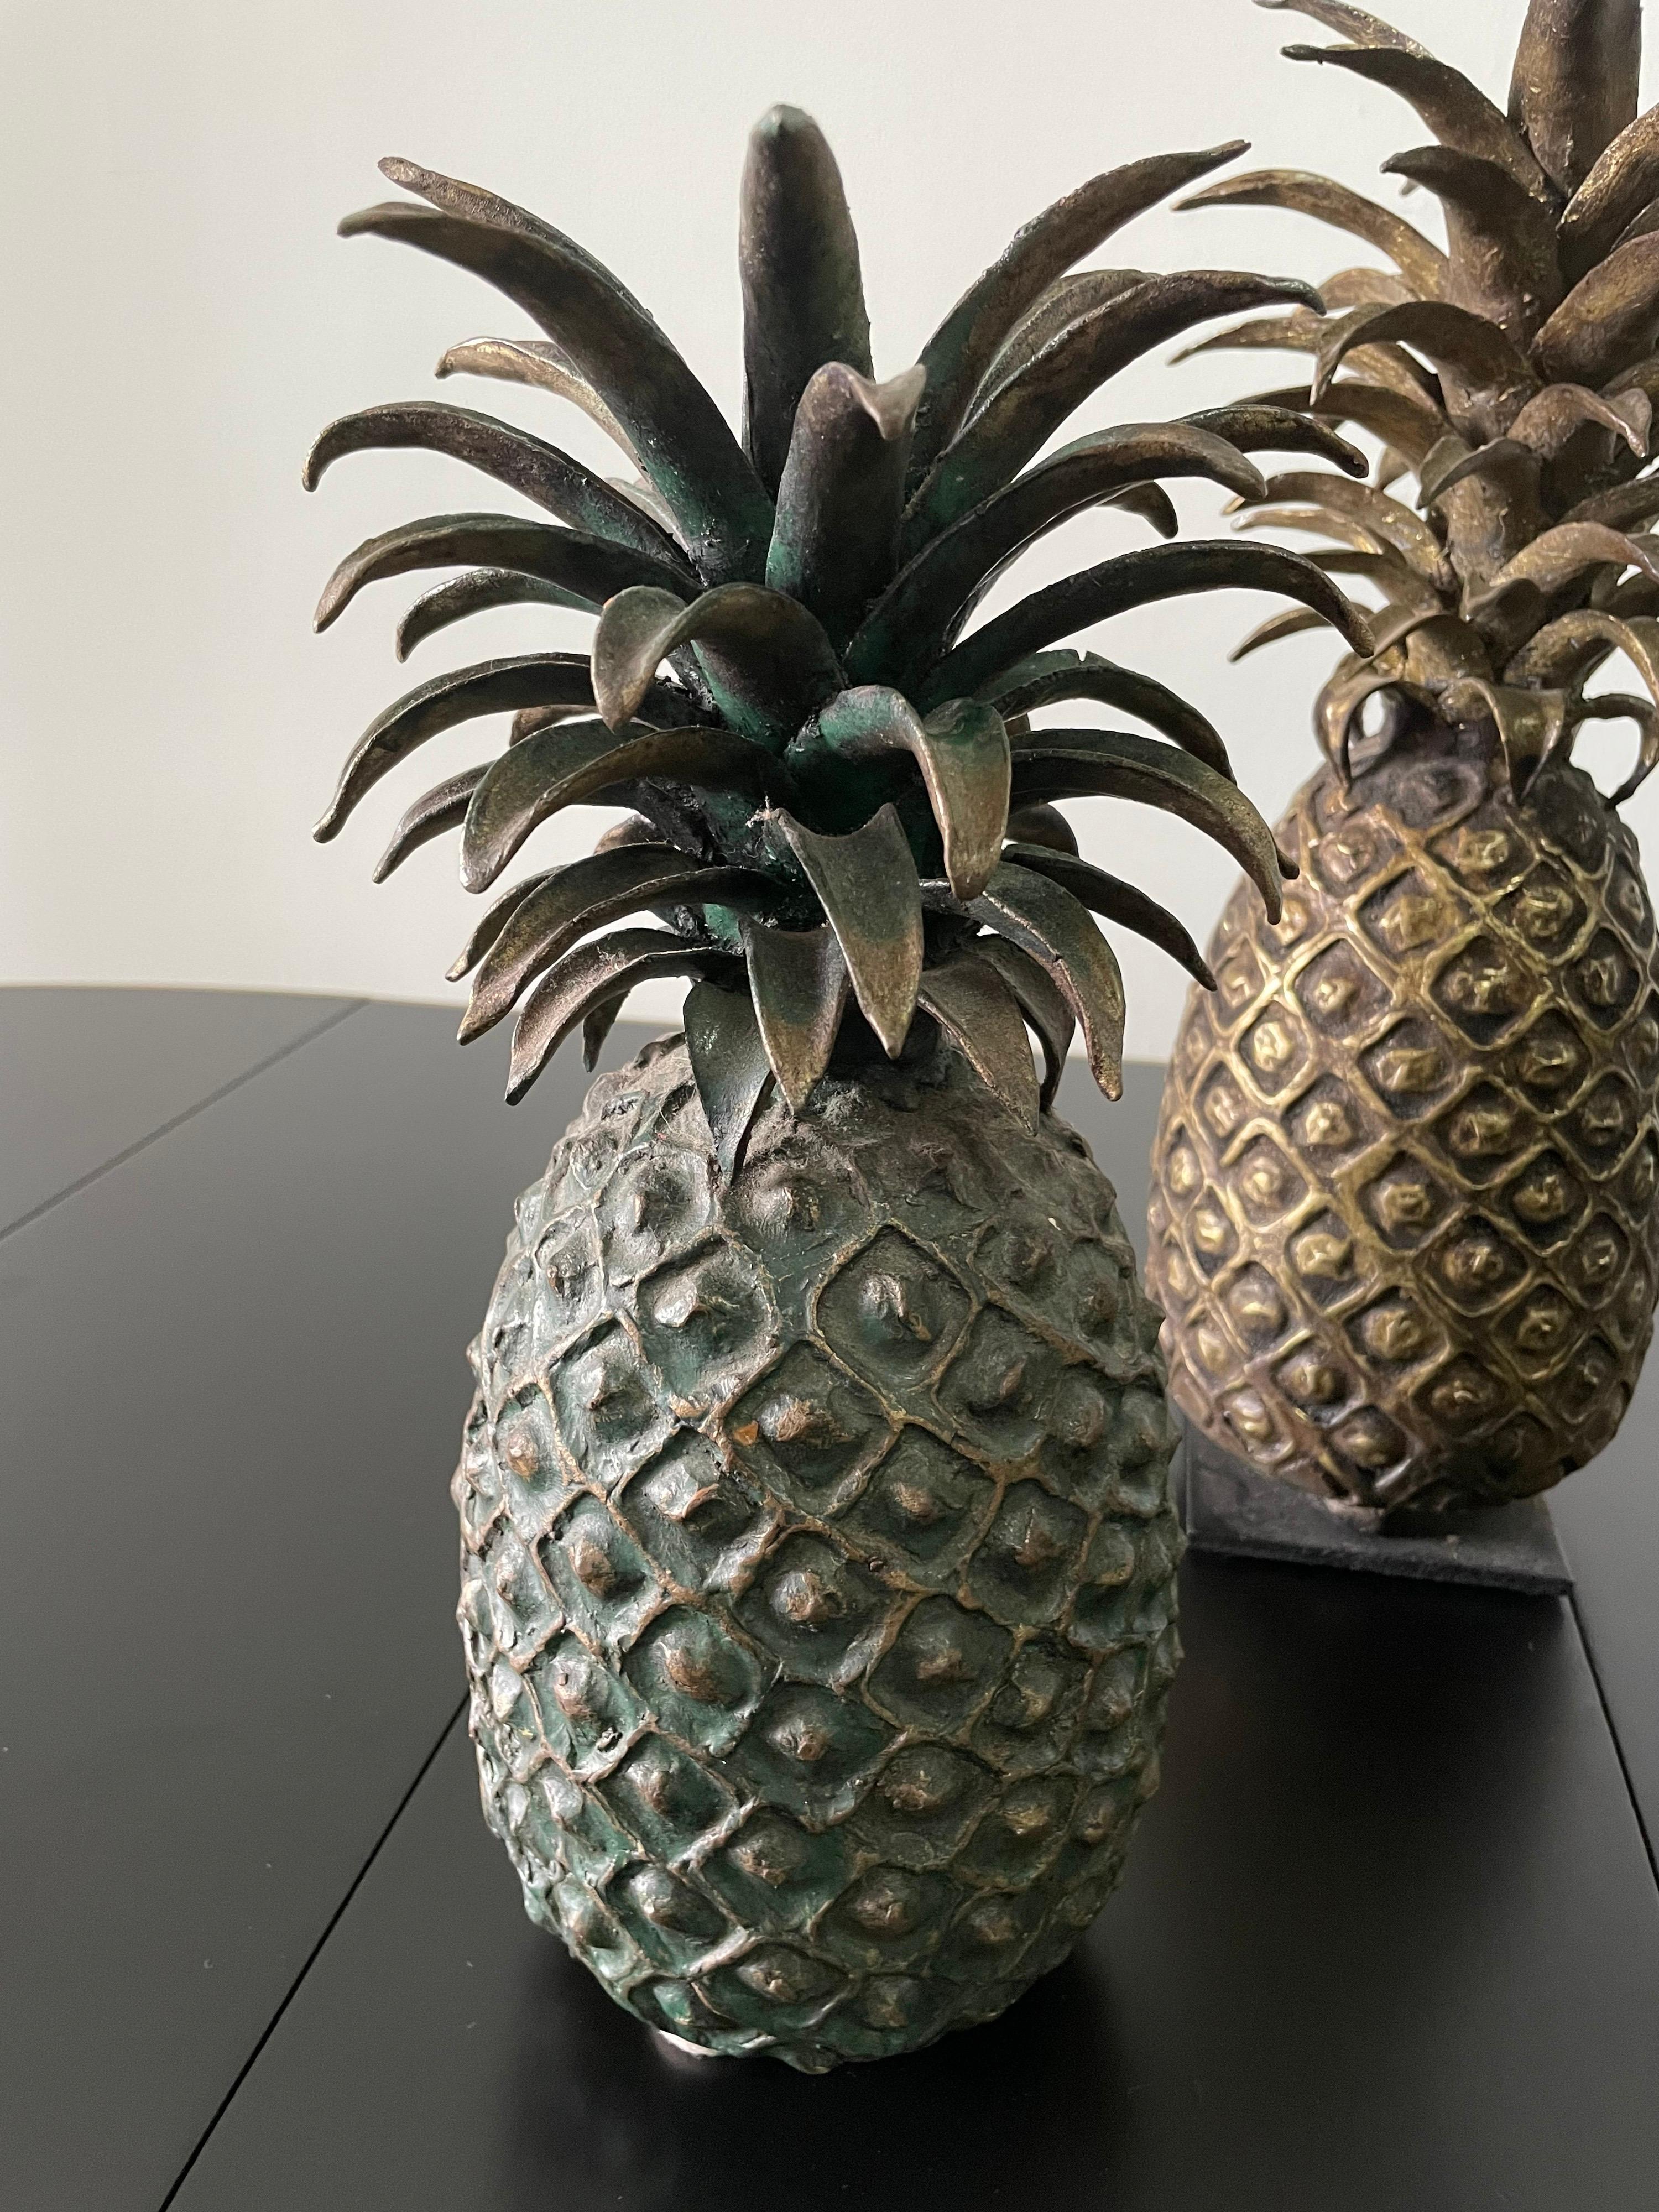 Mid-20th Century Grouping of 4 Vintage Lost Wax Bronze Pineapple Sculptures from Ivory Coast